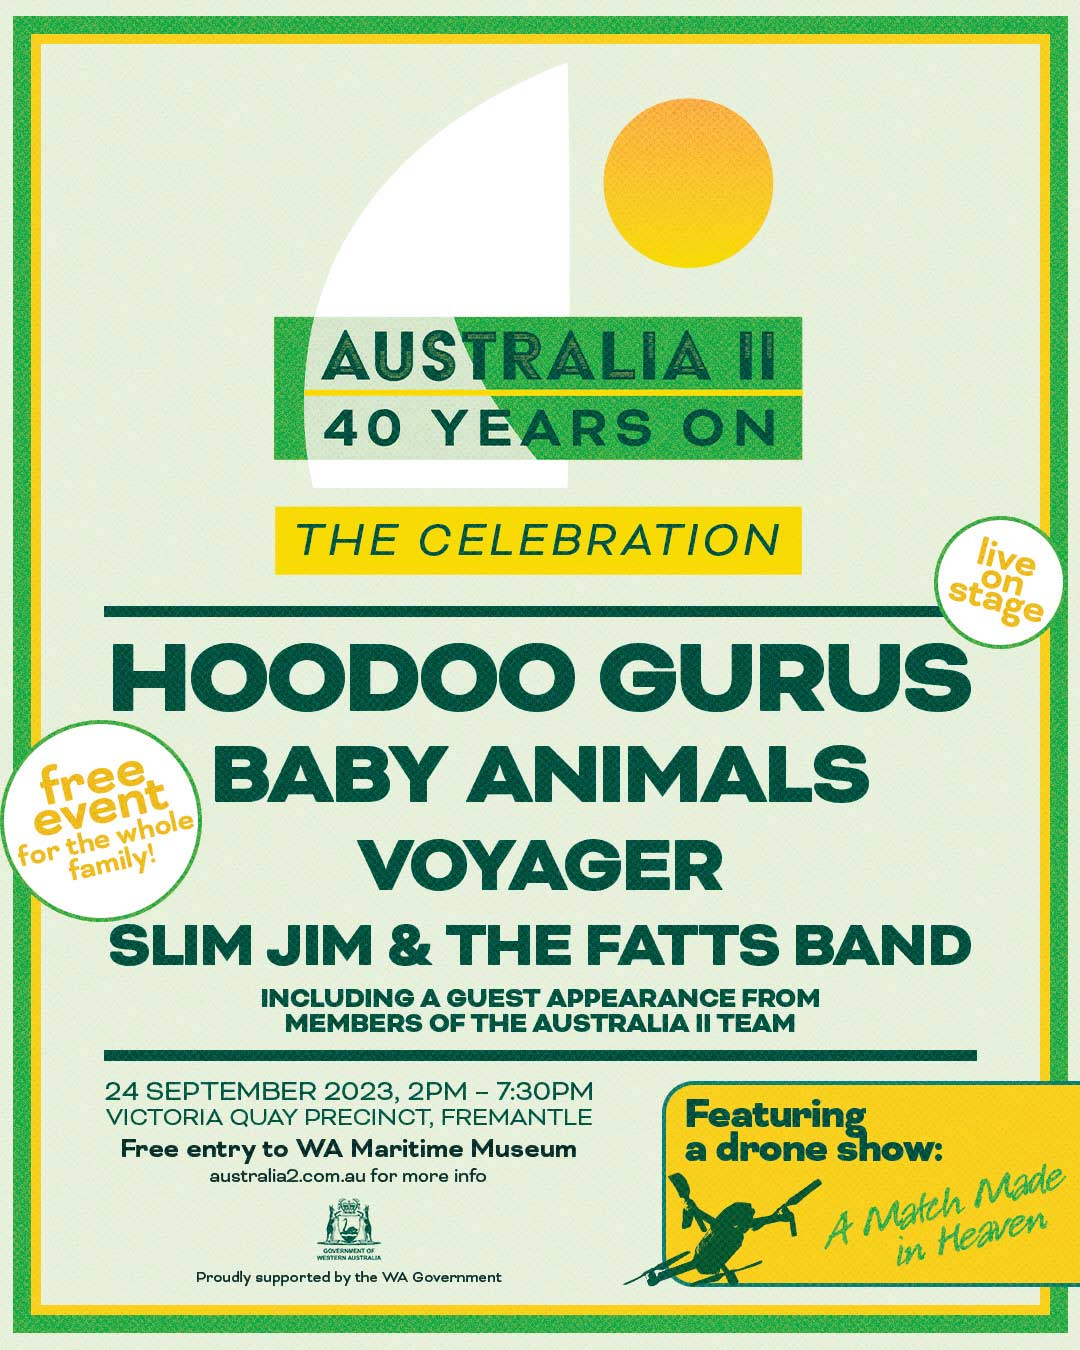 A poster promoting the Australia II 40 years event